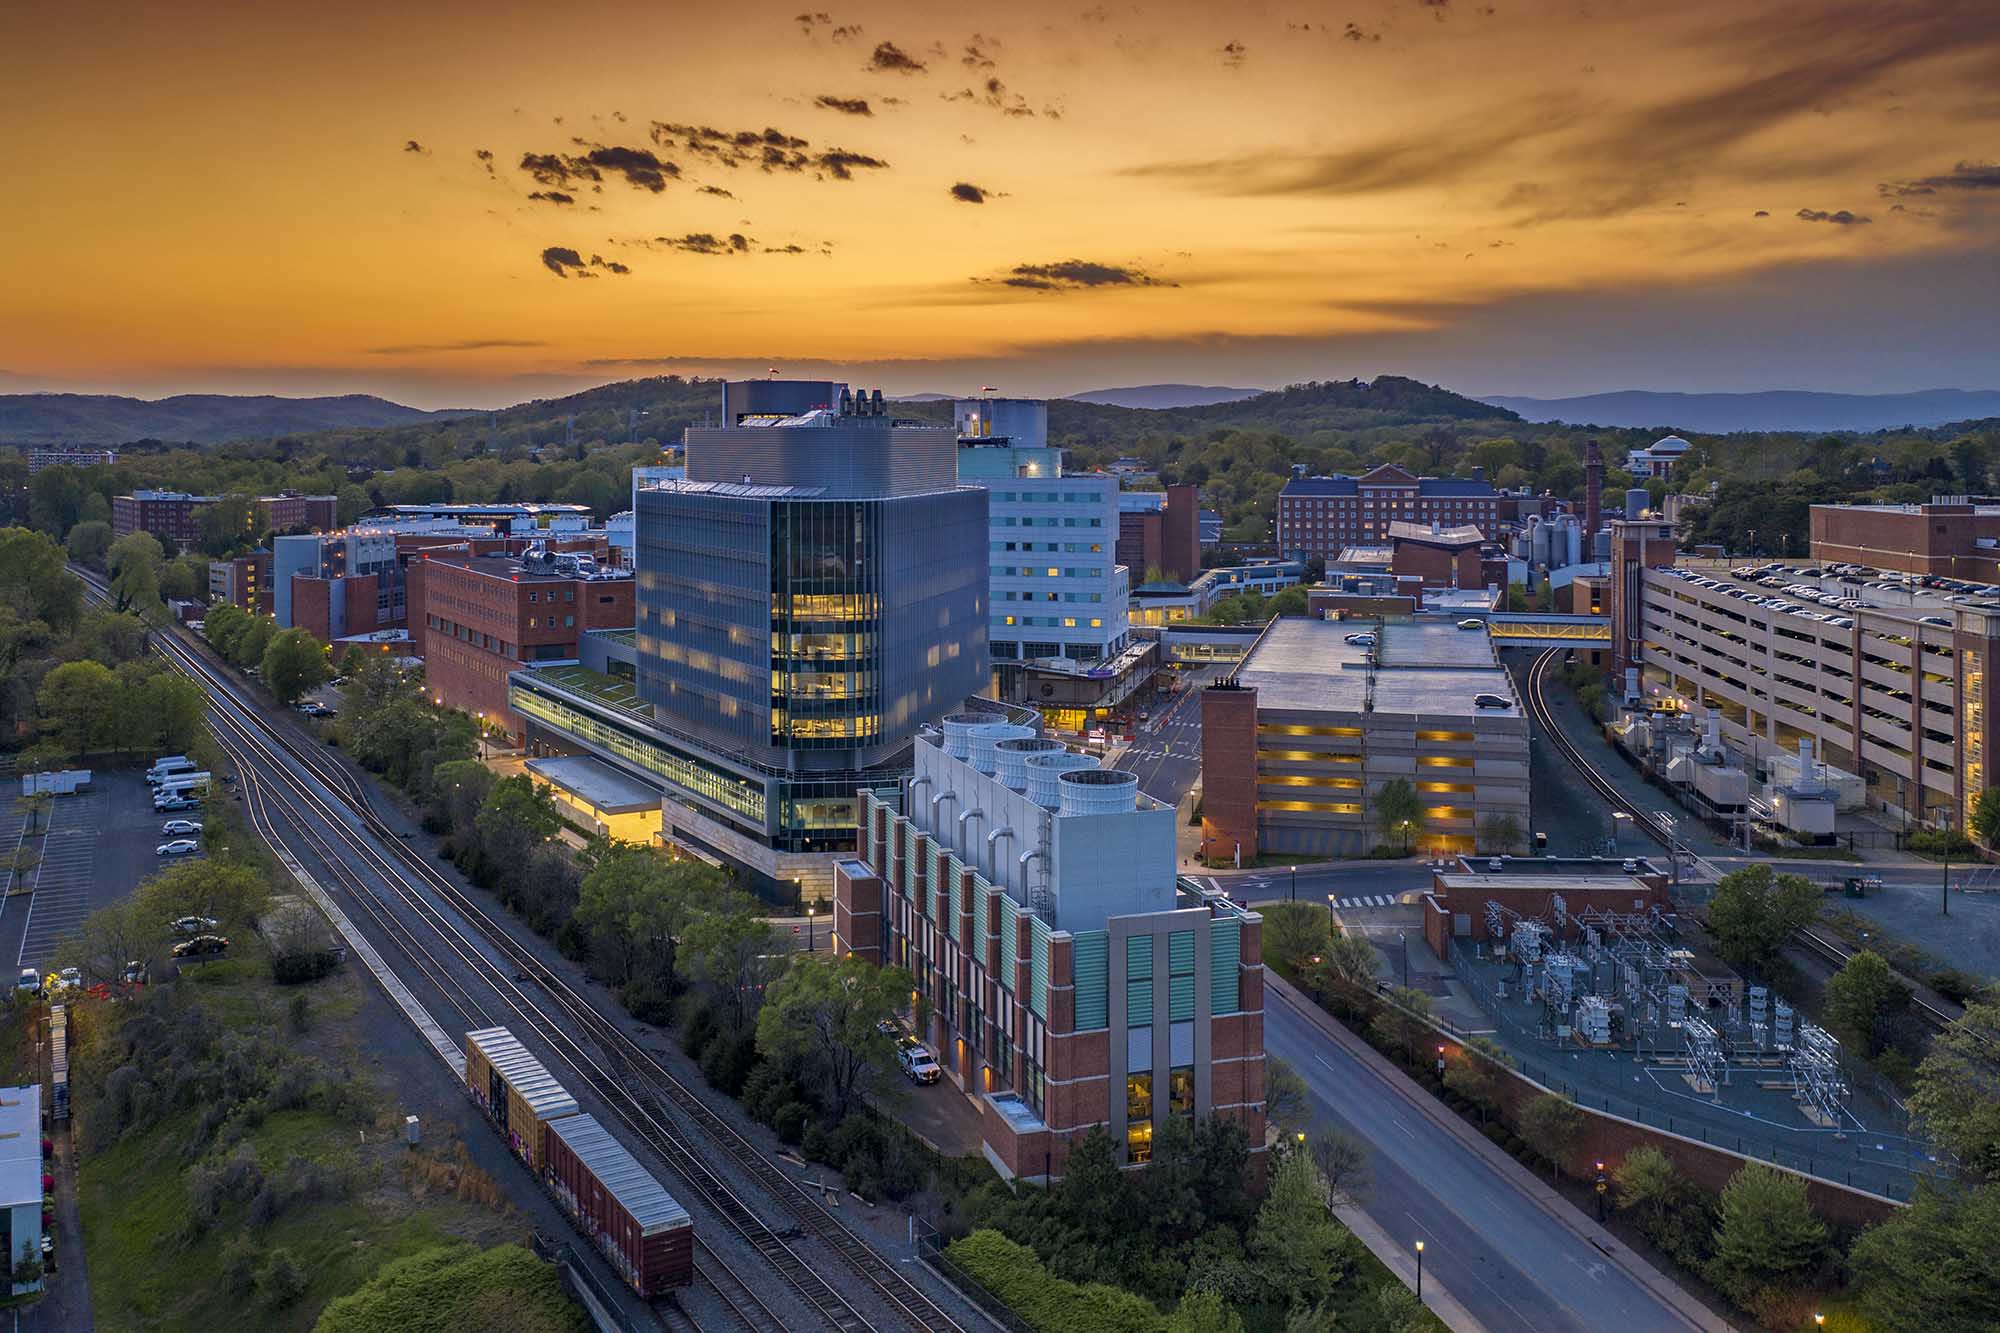 Aerial view of the UVA Health Center Buildings during a orange sunset